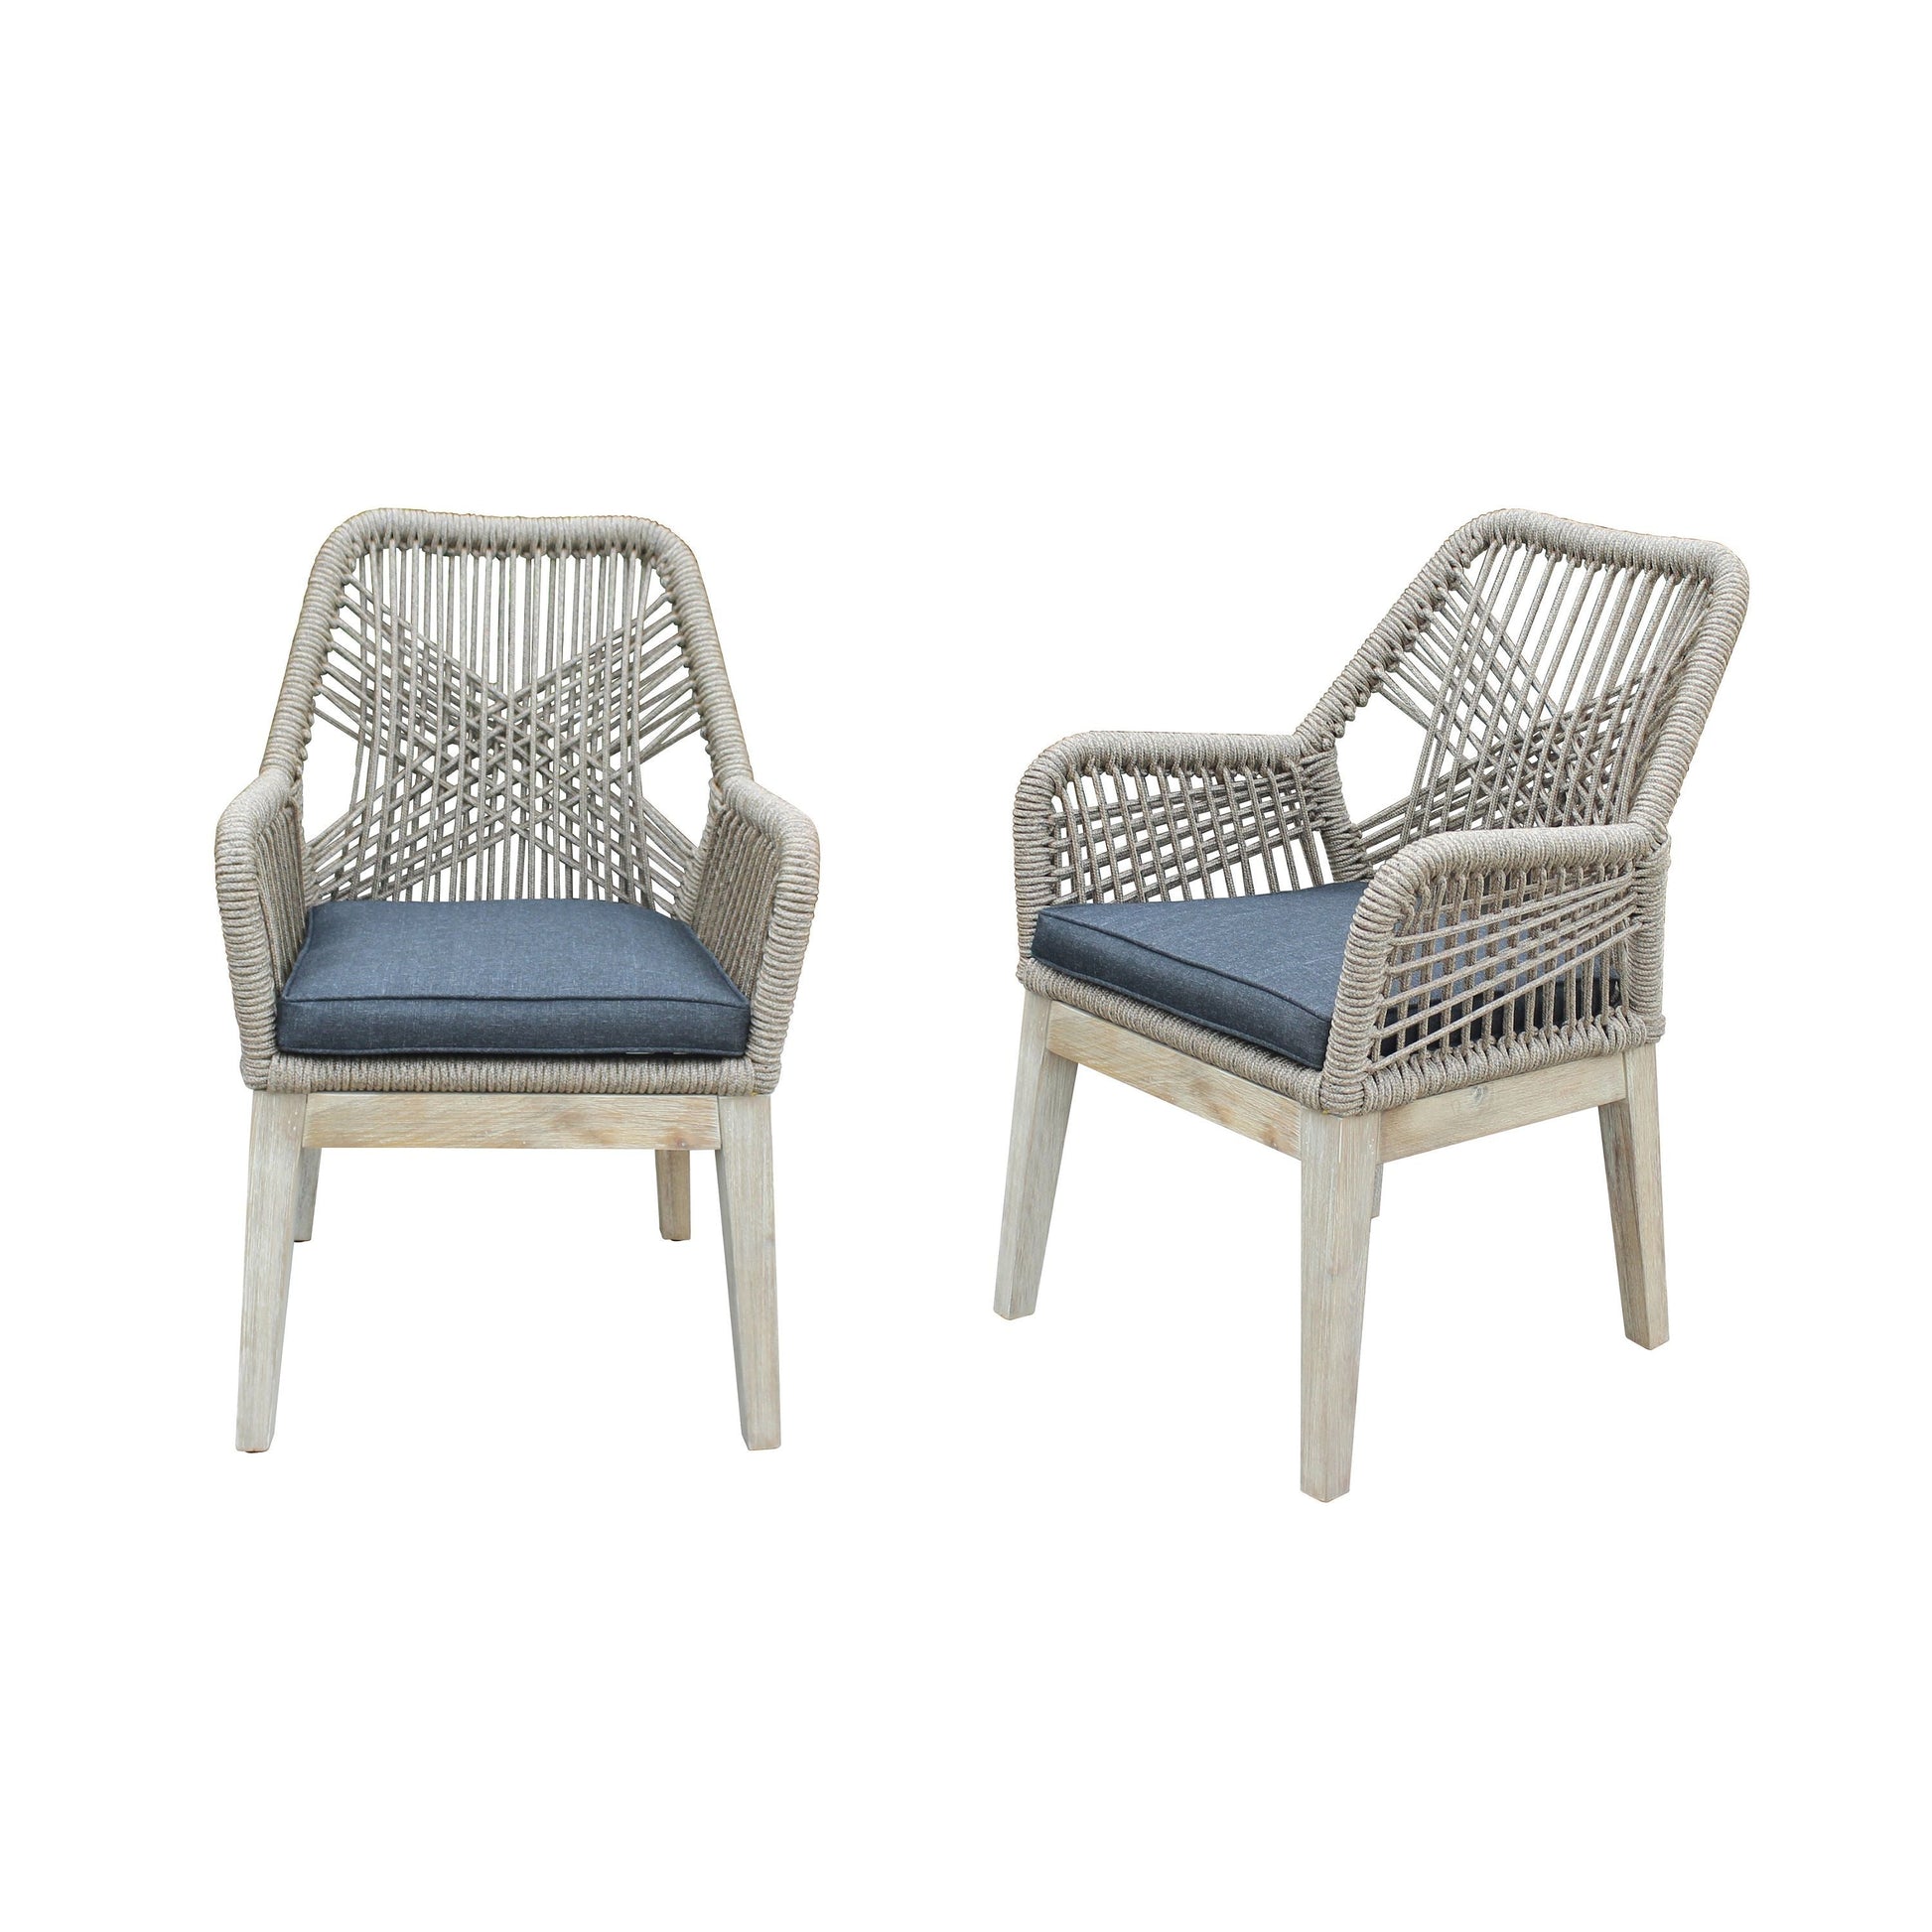 Santino Wood, Aluminum, and Rope Dining Chair with Cushion (Set Of 2) 4